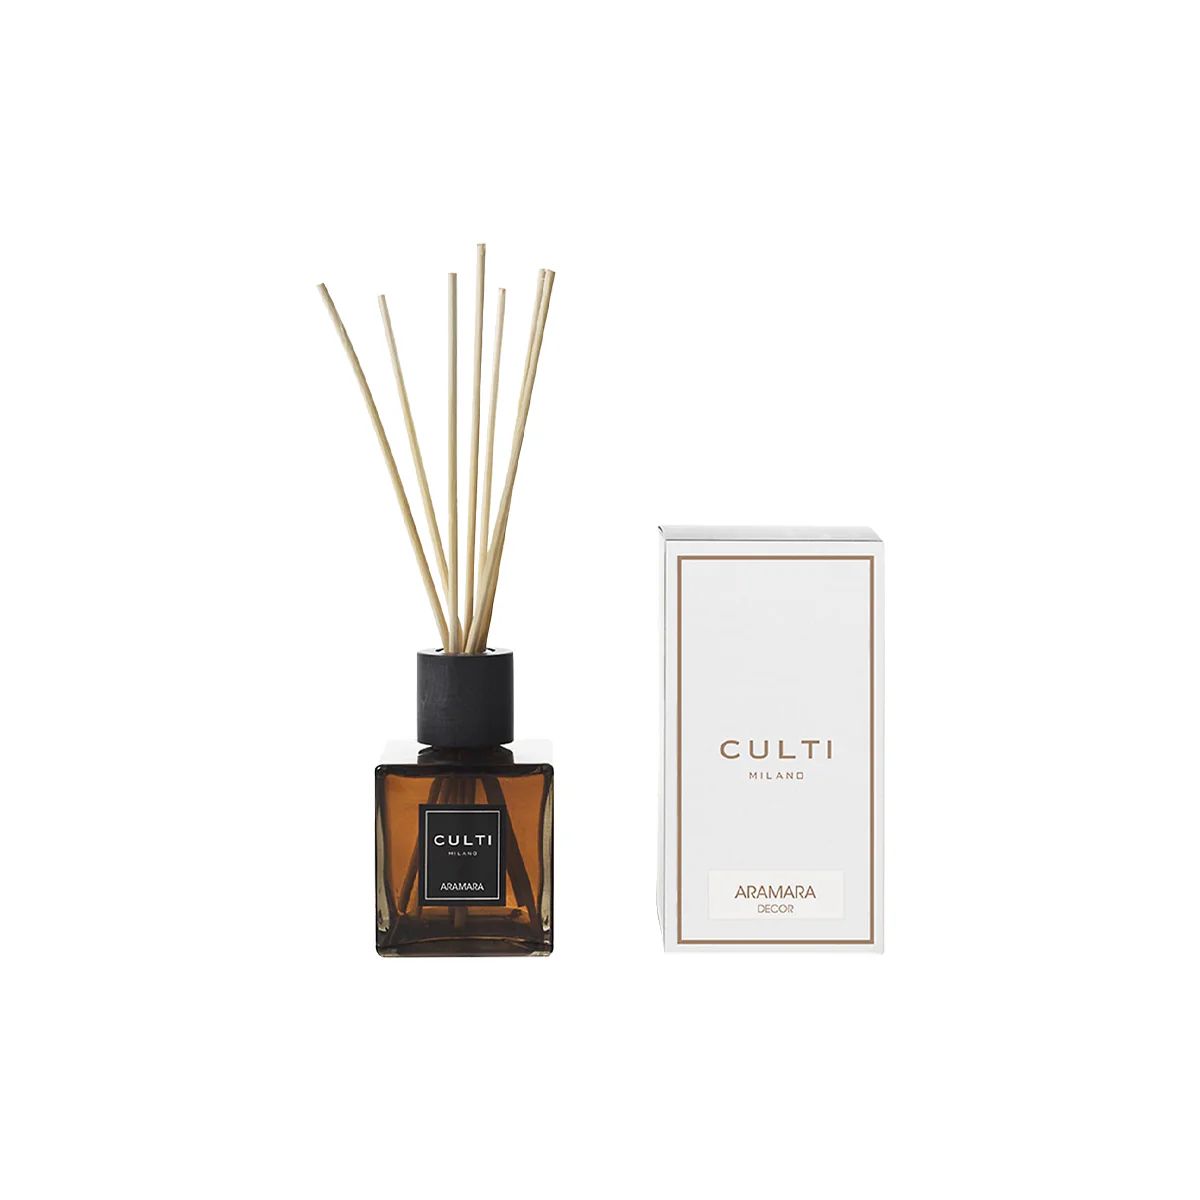 Culti Fragrance Diffuser | Tuesday Made